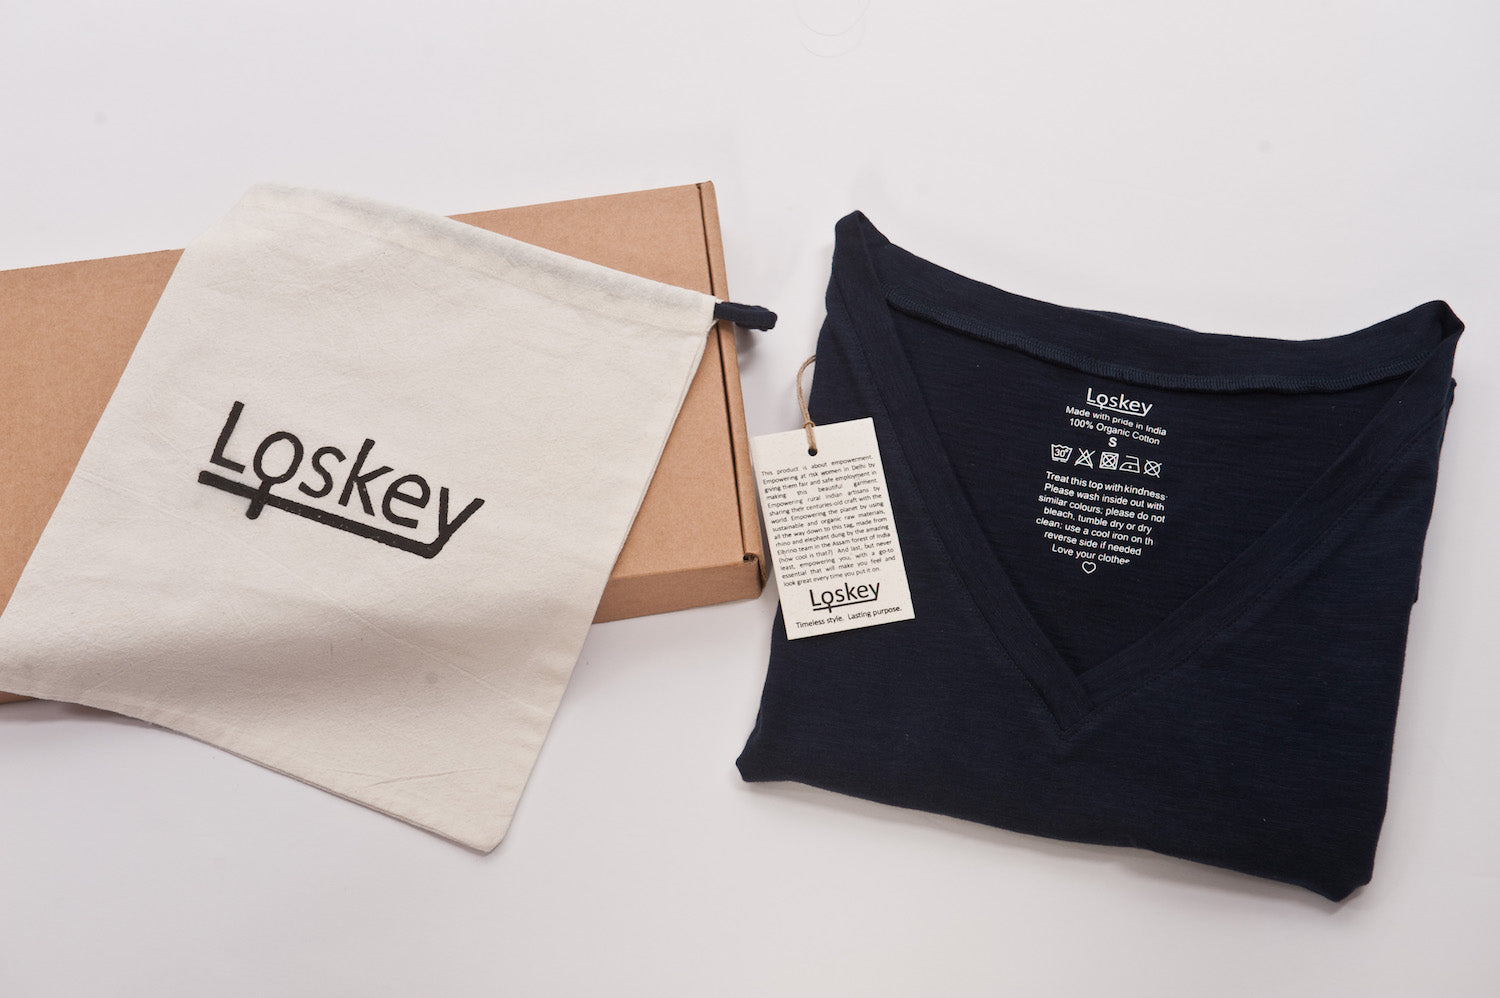 loskey-t-shirts-committed-to-sustainability-in-fashion